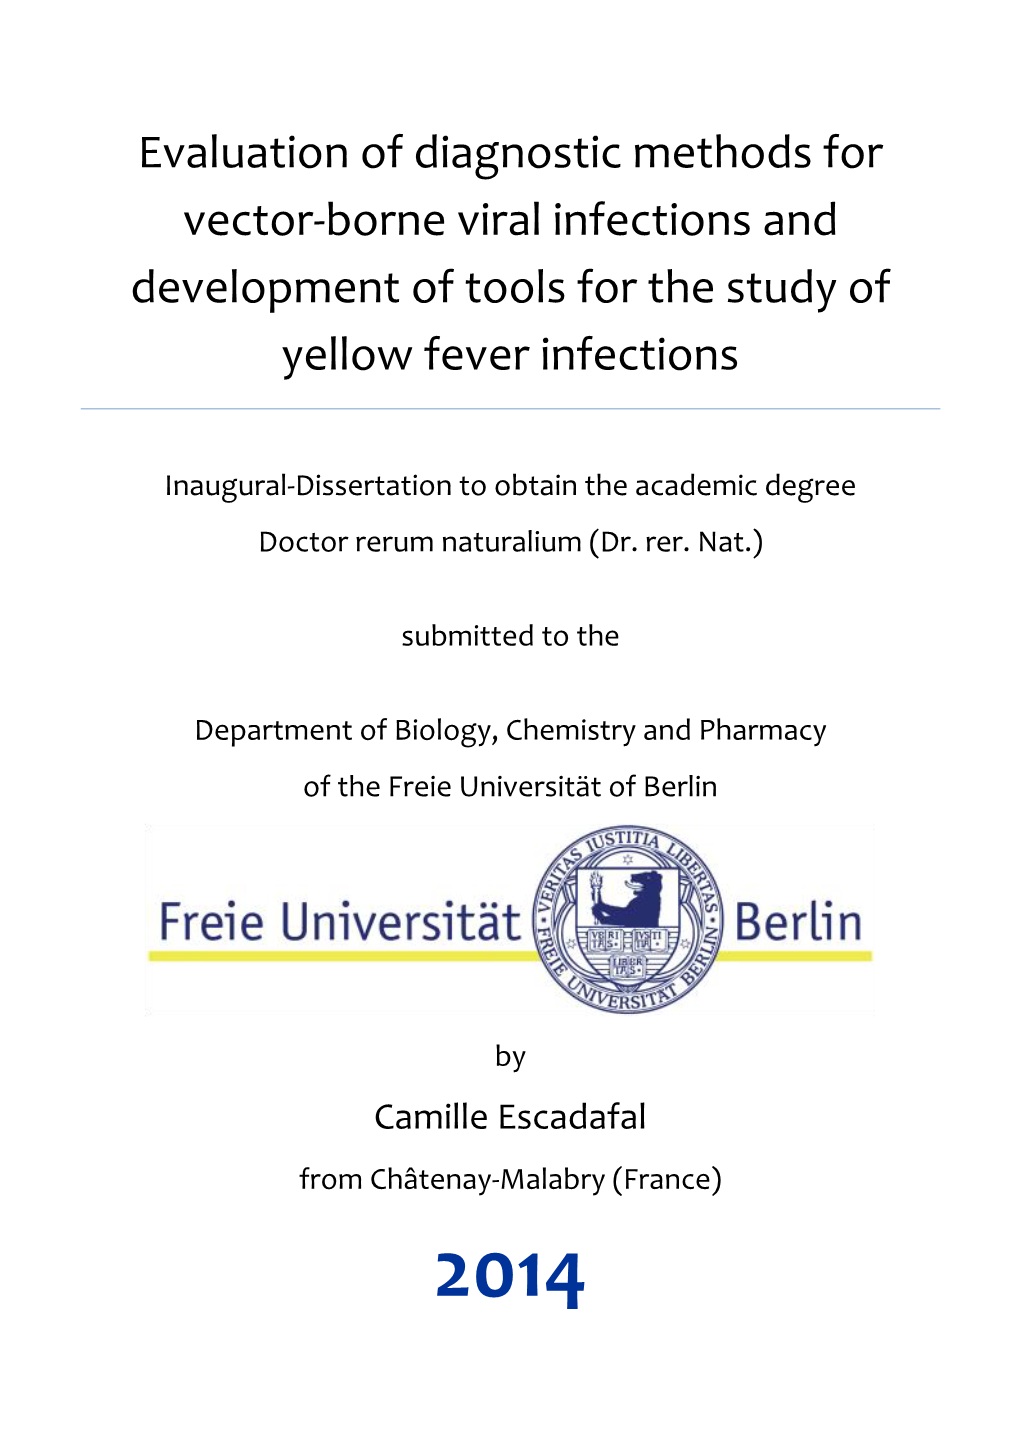 Evaluation of Diagnostic Methods for Vector-Borne Viral Infections and Development of Tools for the Study of Yellow Fever Infections